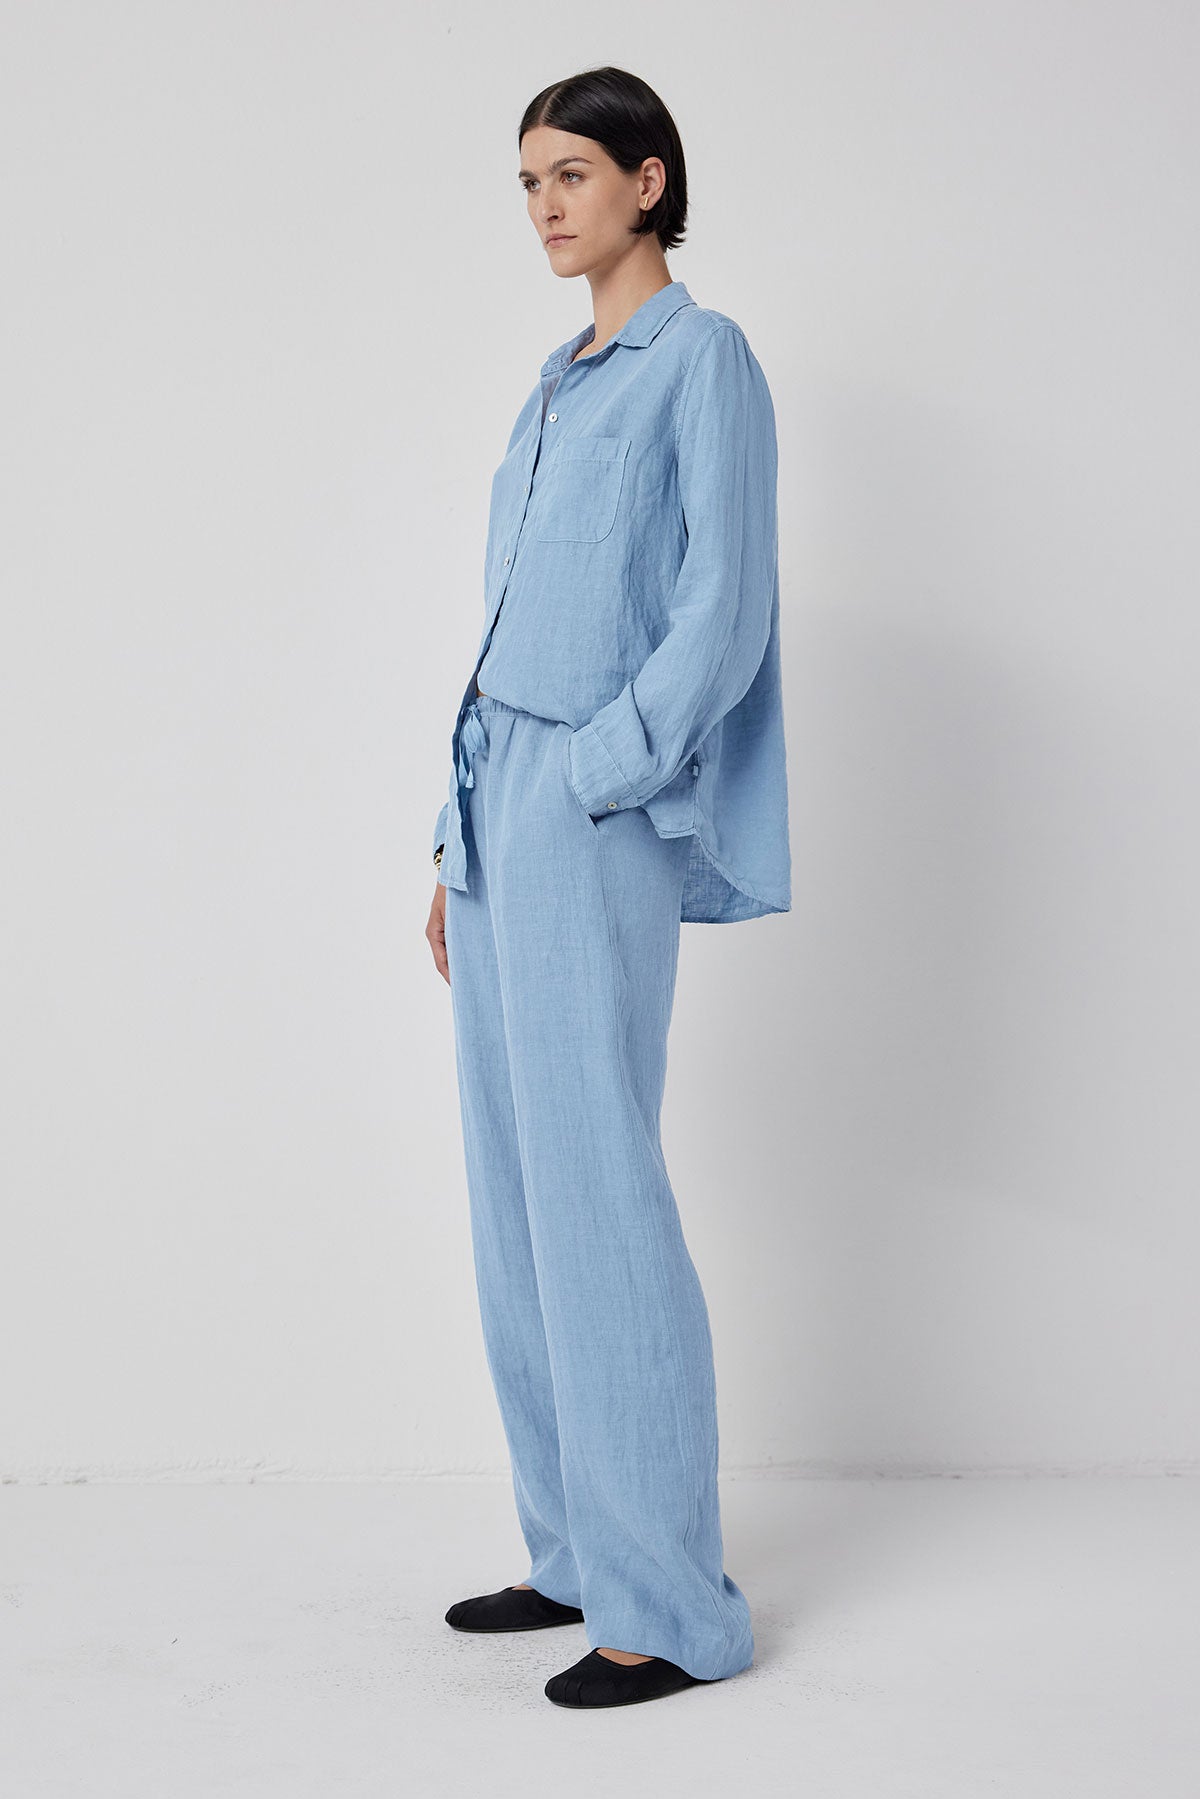   A woman in a light blue linen shirt and matching PICO LINEN PANT with an elastic waist stands against a white background, looking to the side. Brand: Velvet by Jenny Graham 